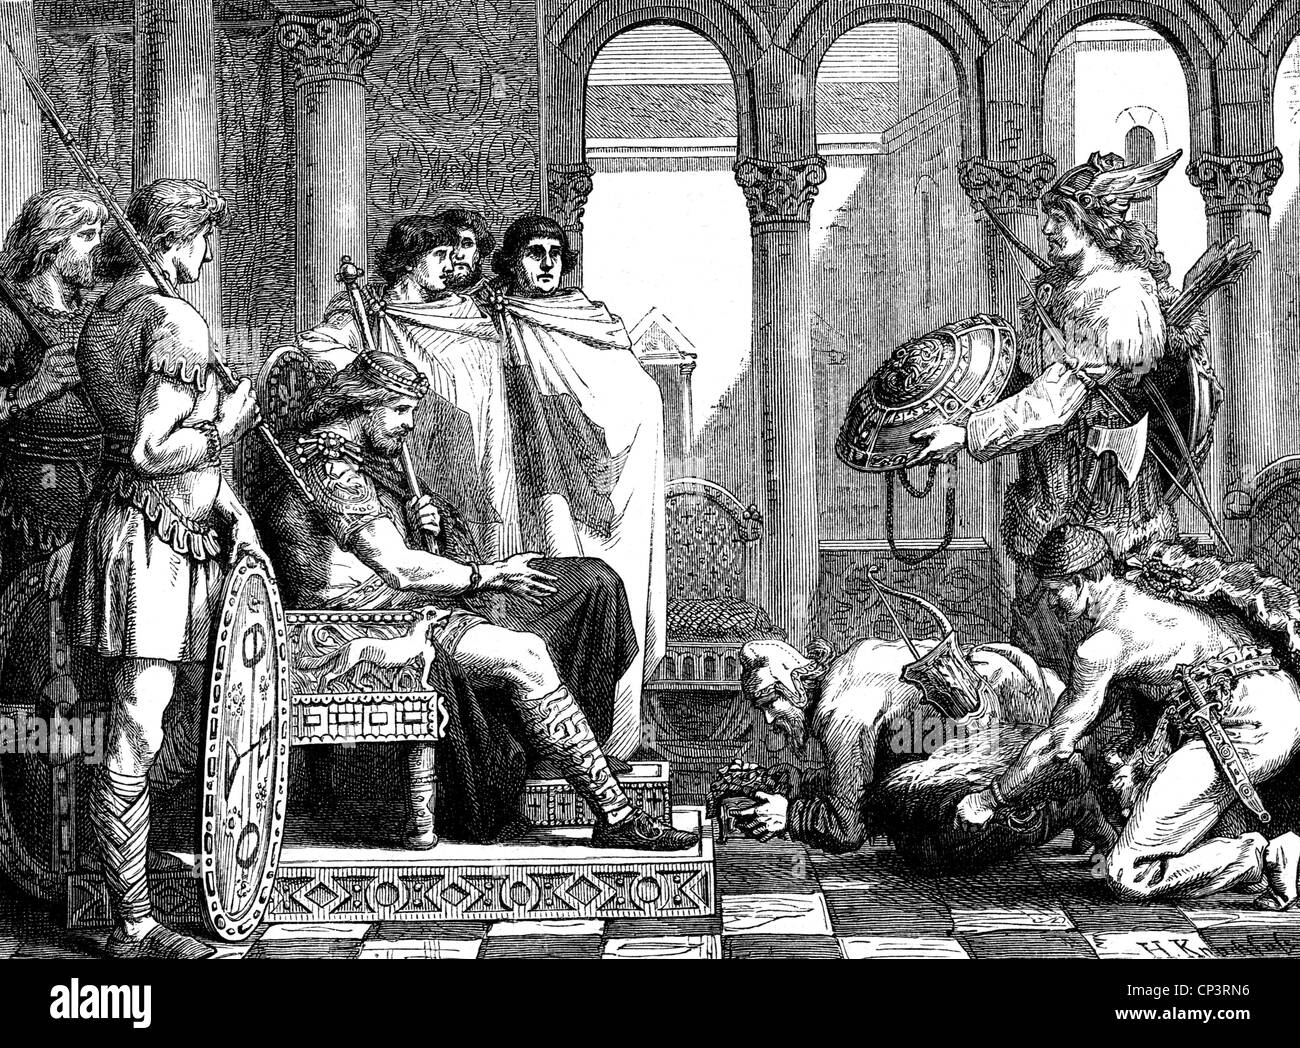 Theodoric the Great, circ 454 - 30.8.526, King of the Ostrogoths 471 - 526, scene, envoys from Scandinavia offering him presents, wood engraving, 19th century, Stock Photo